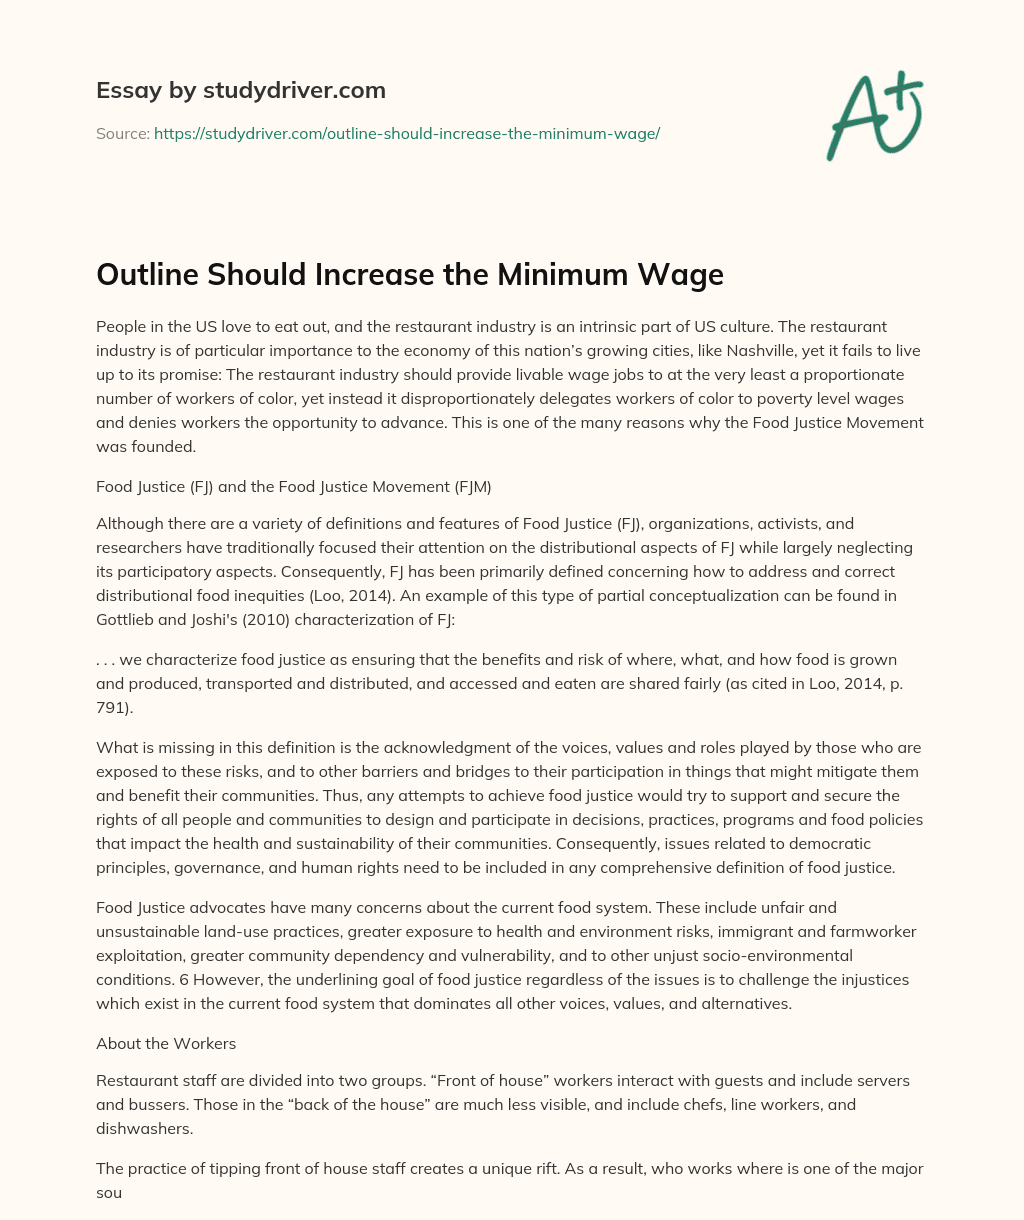 Outline should Increase the Minimum Wage essay